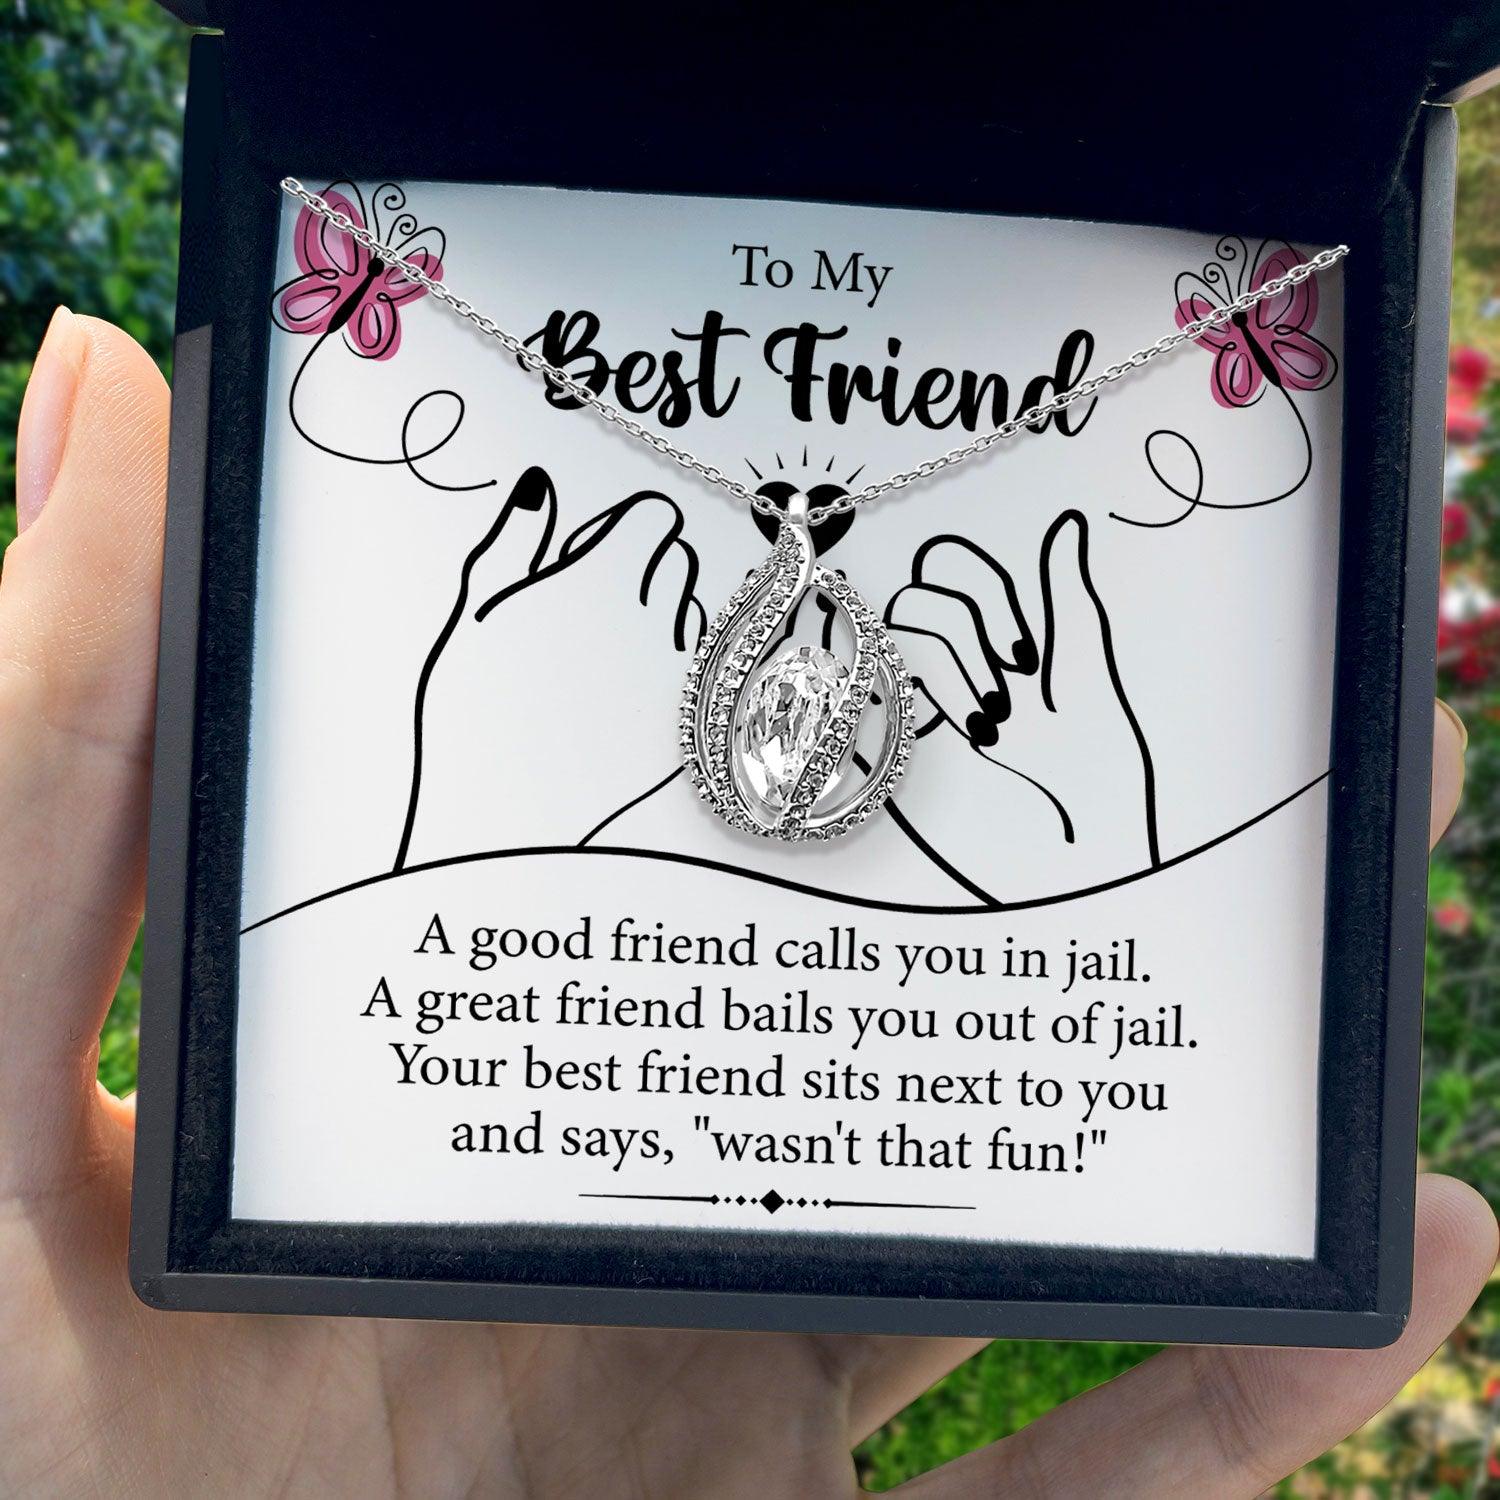 To My Best Friend - A Good Friend Calls You In Jail - Orbital Birdcage Necklace - TRYNDI